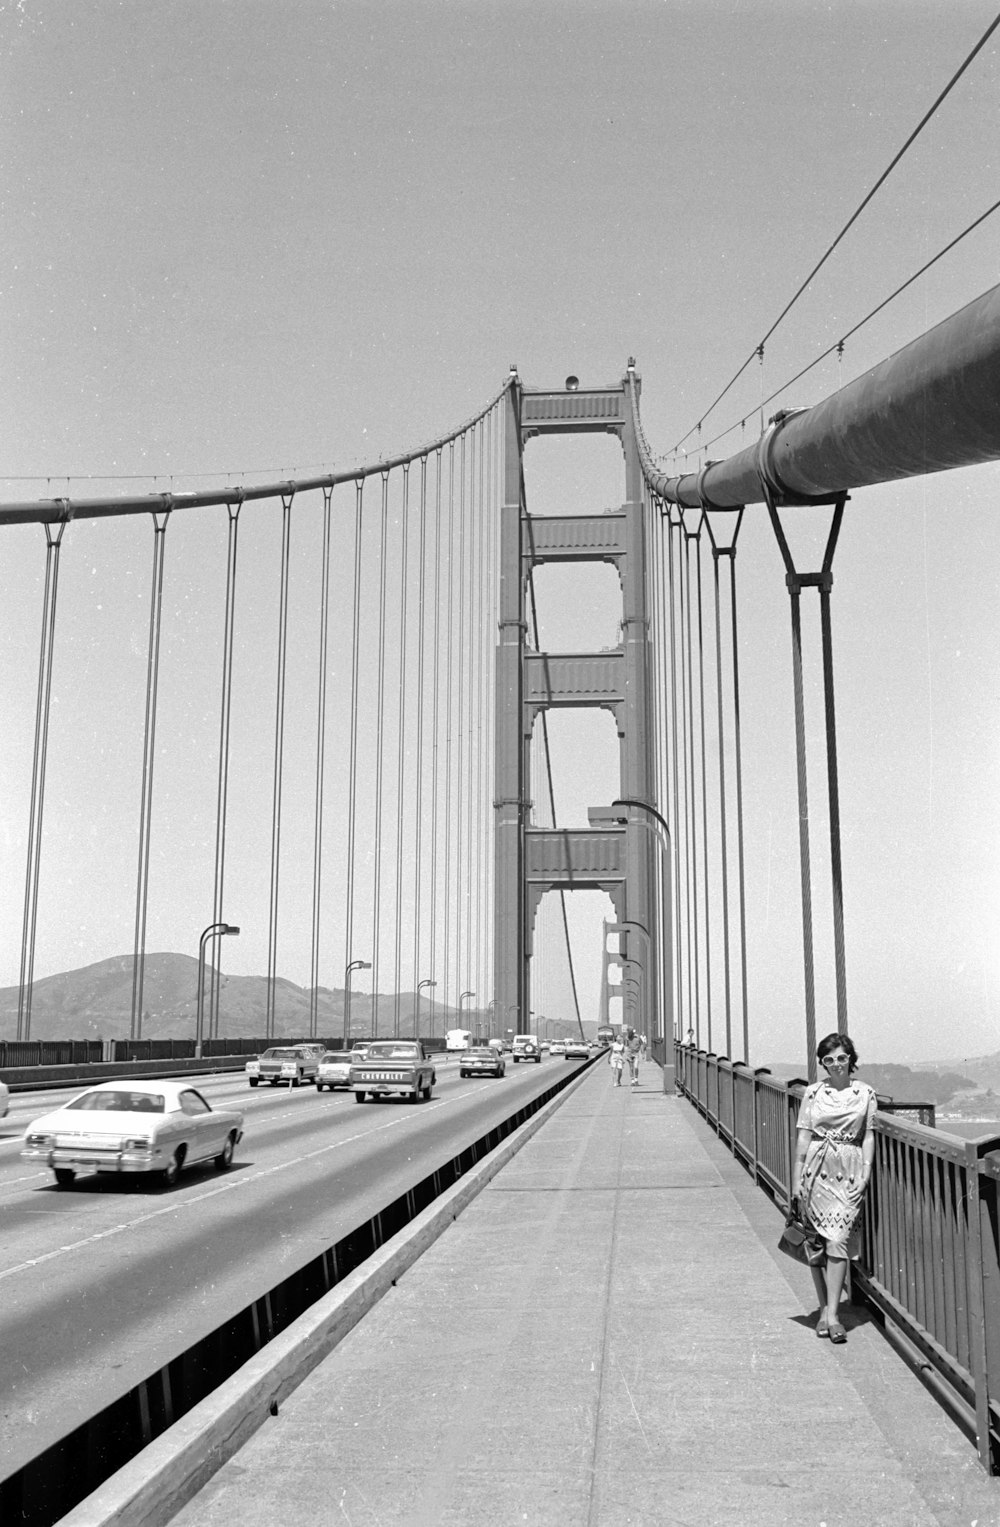 grayscale photo of bridge with cars on road